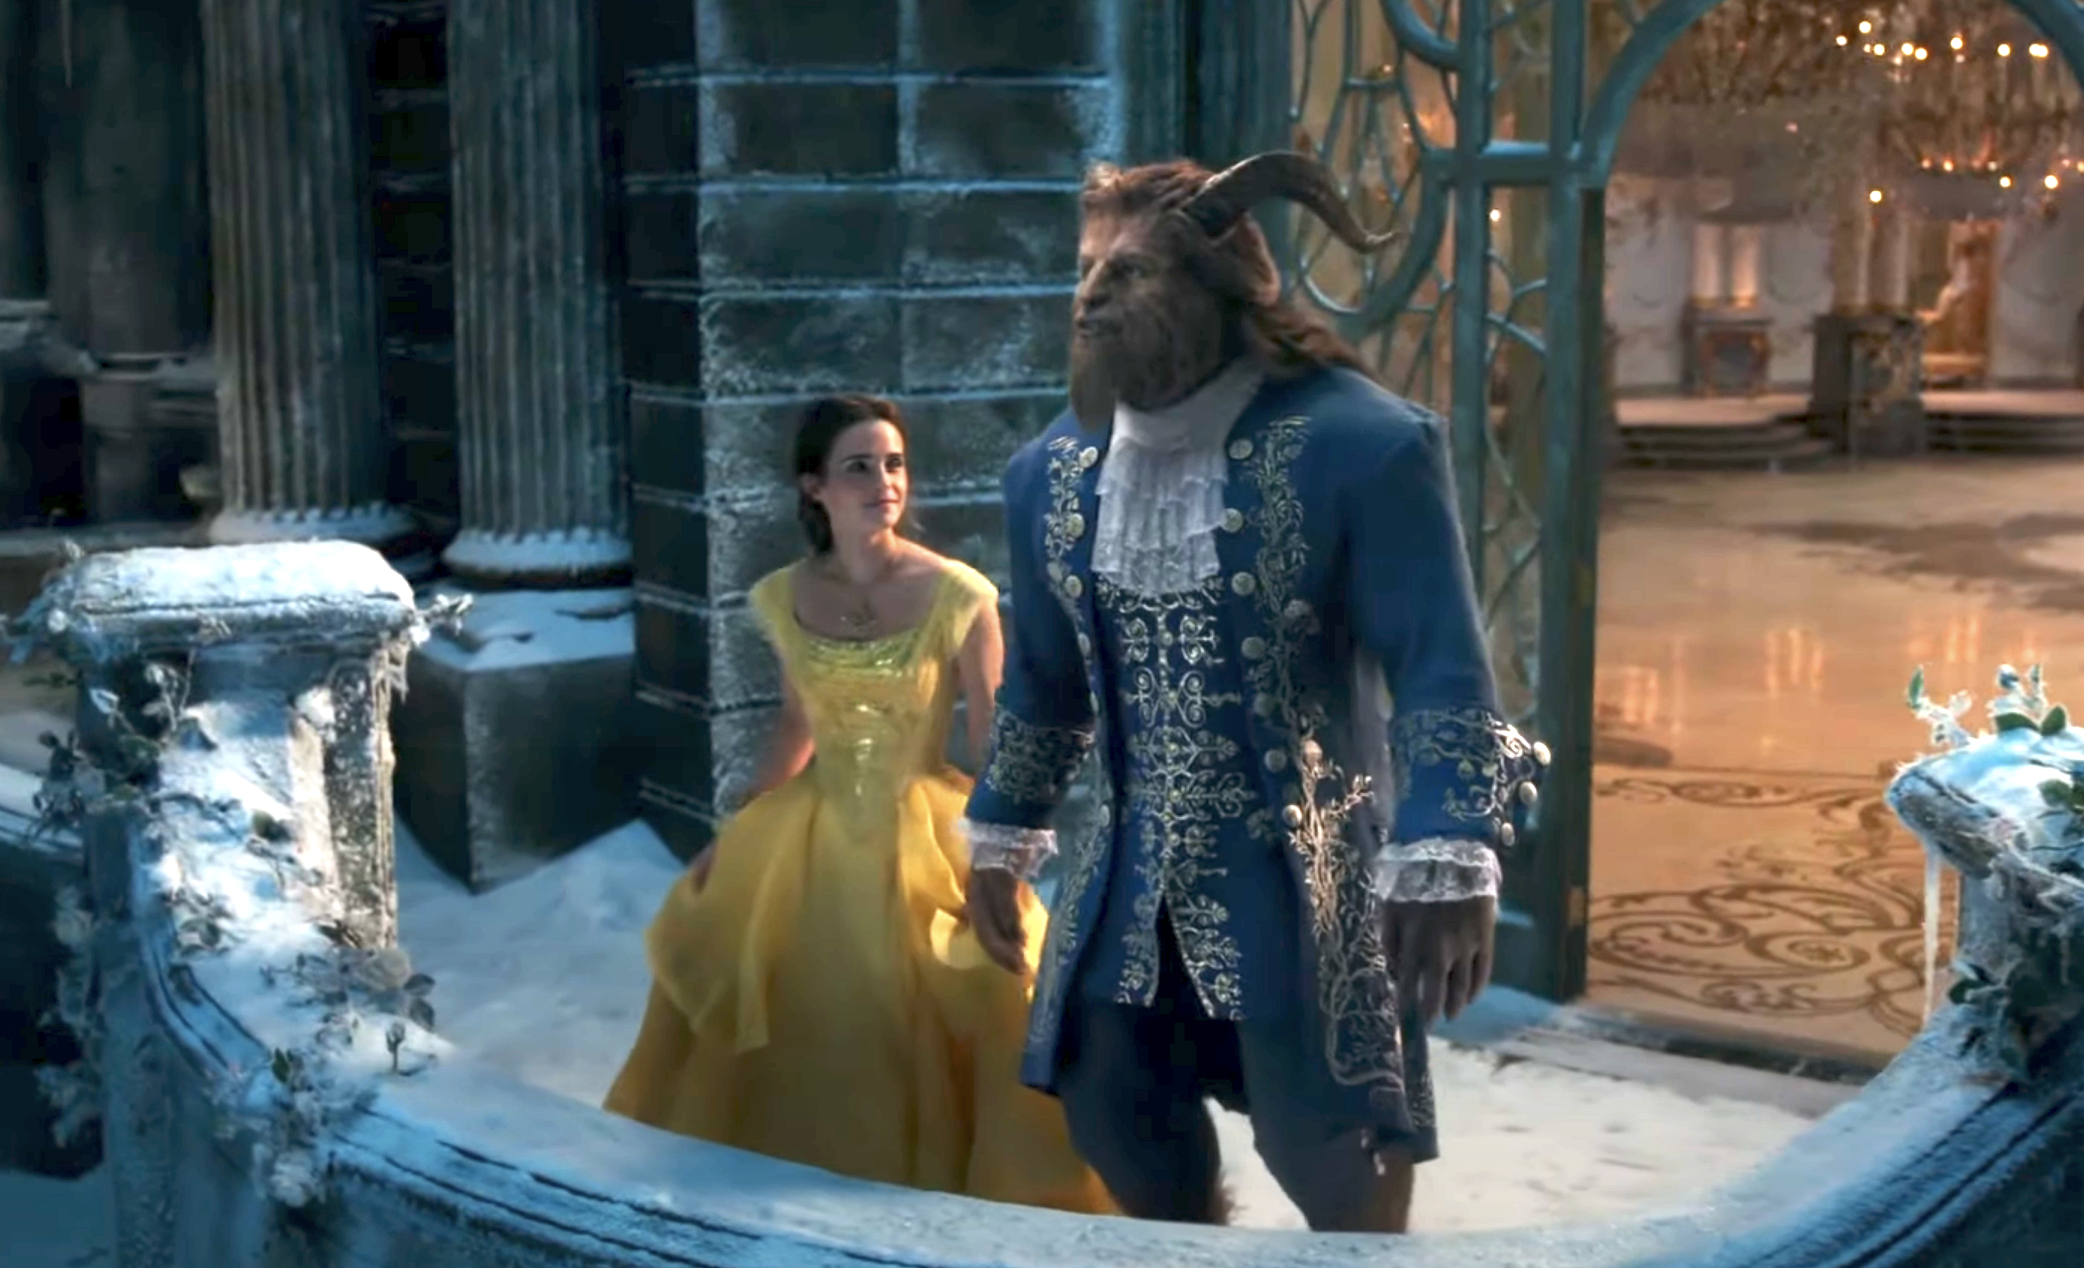 Belle and Beast standing outside on a balcony together